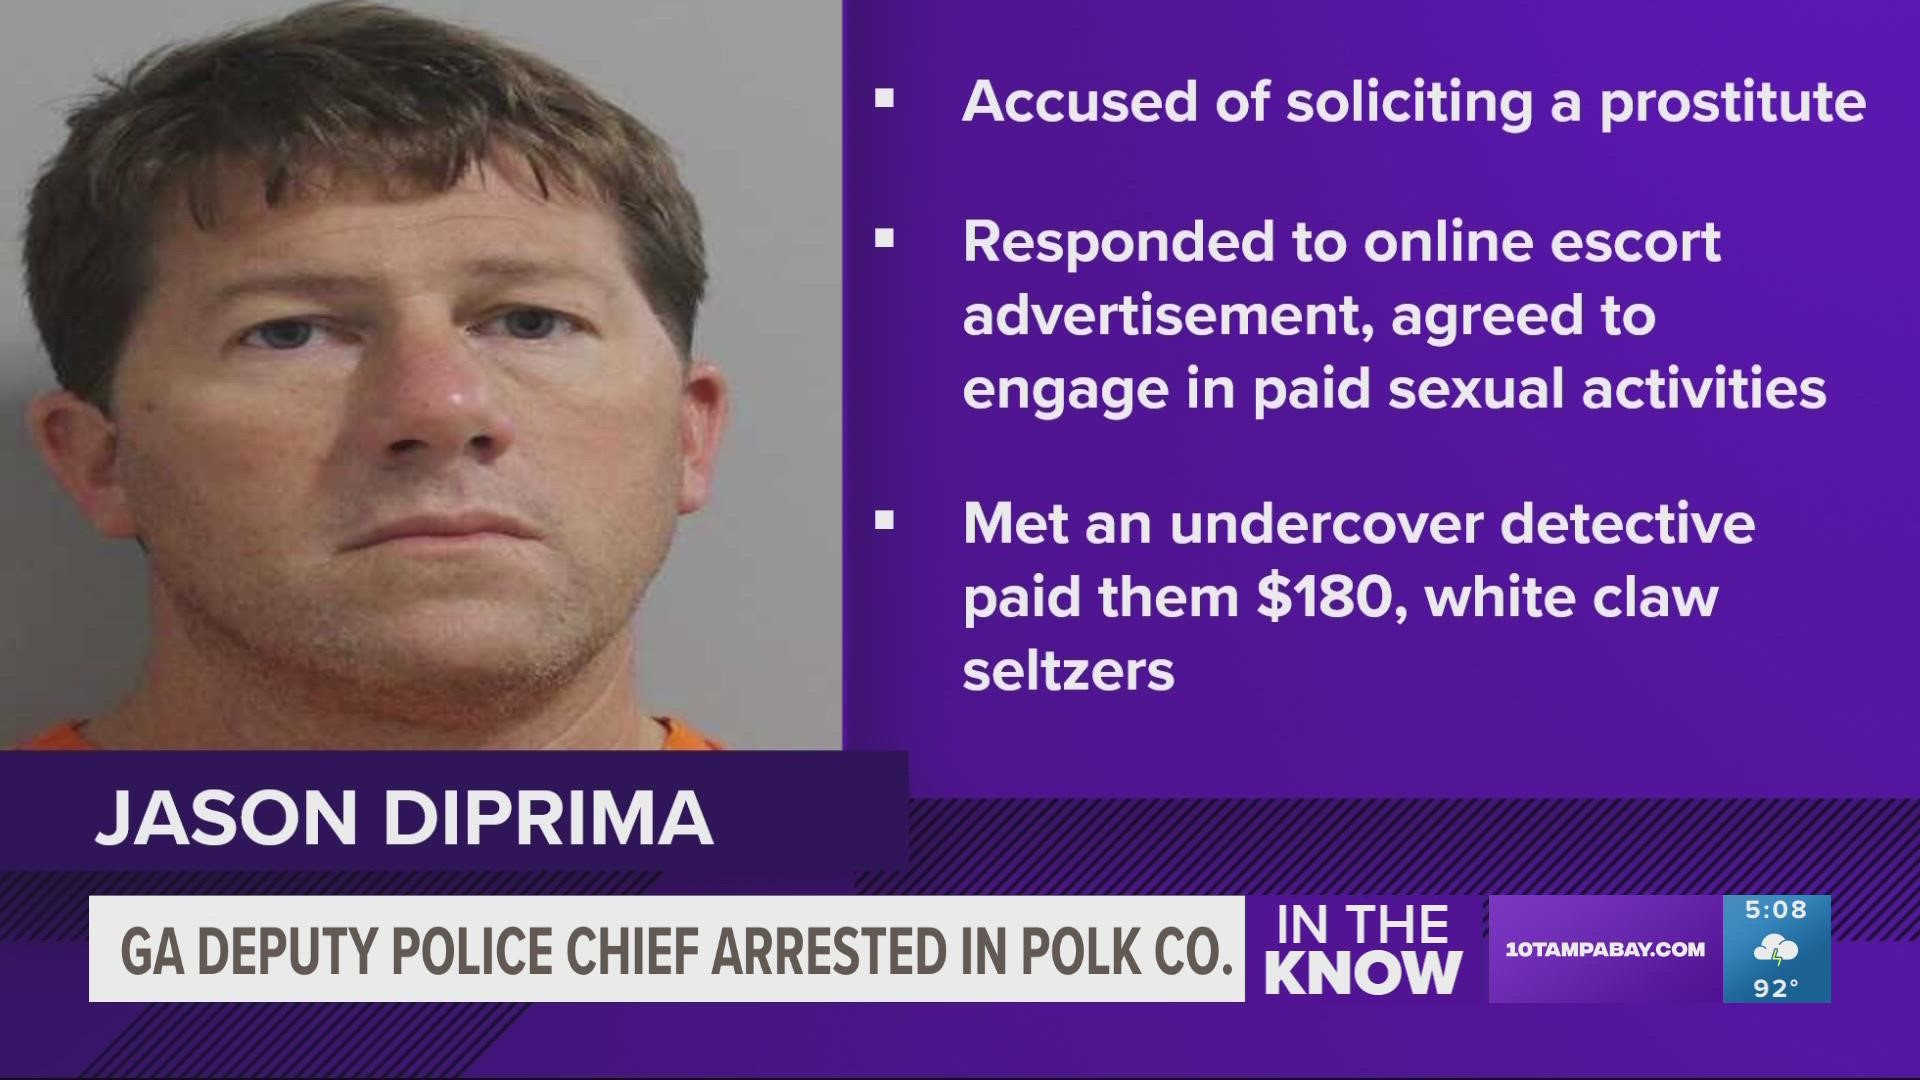 Sheriff's office: Deputy police chief tried to pay for sex with $180